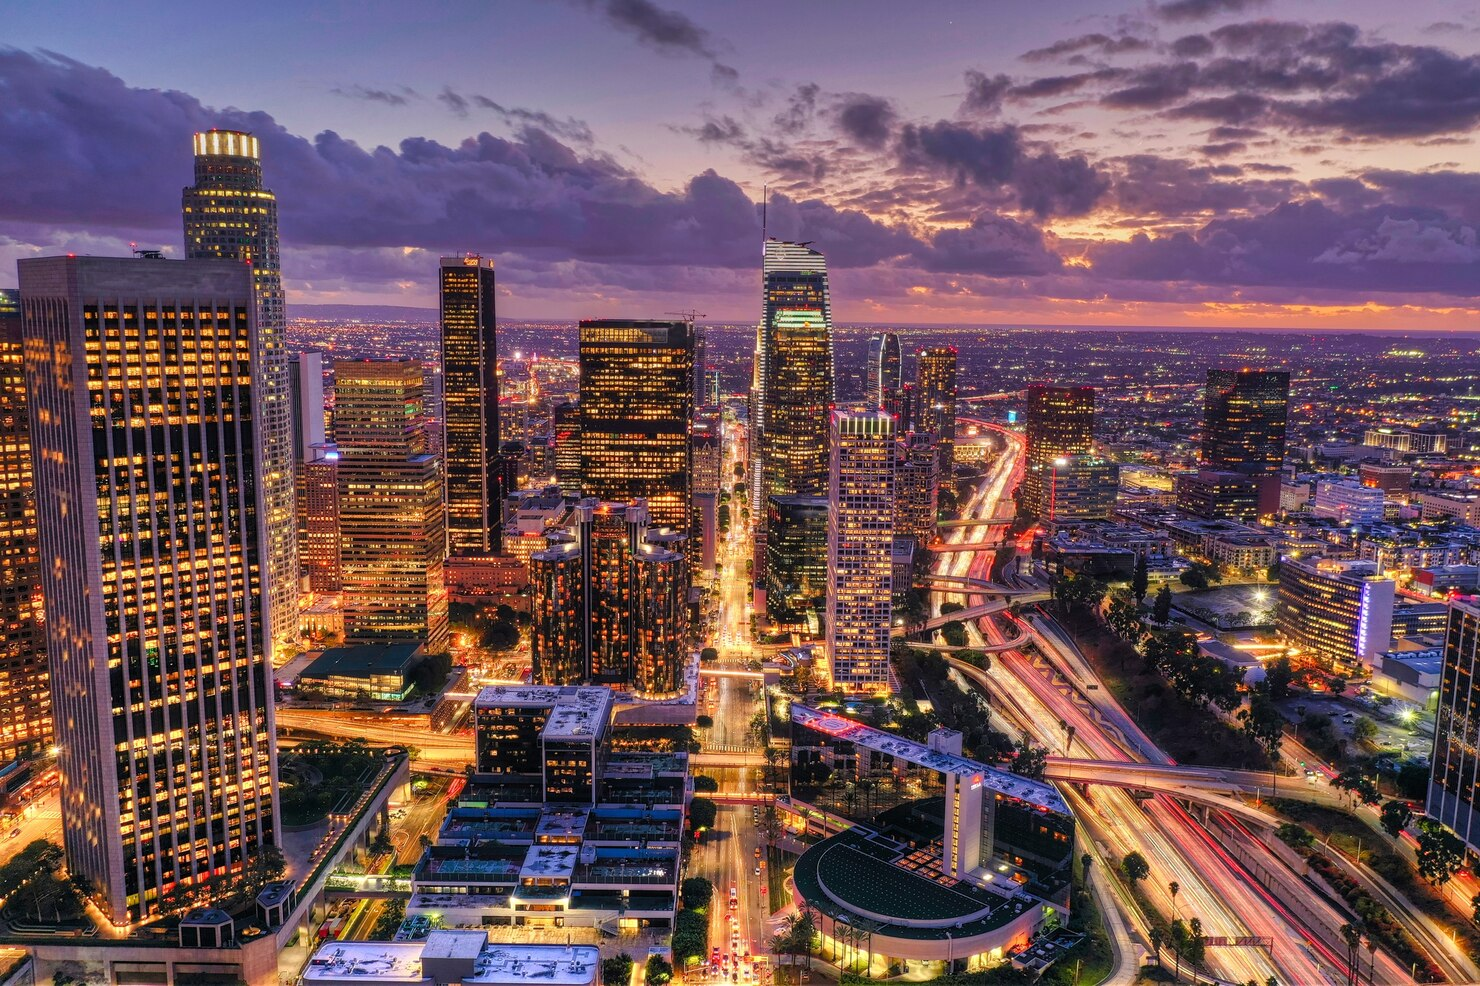 Aerial shot of downtown Los Angeles.